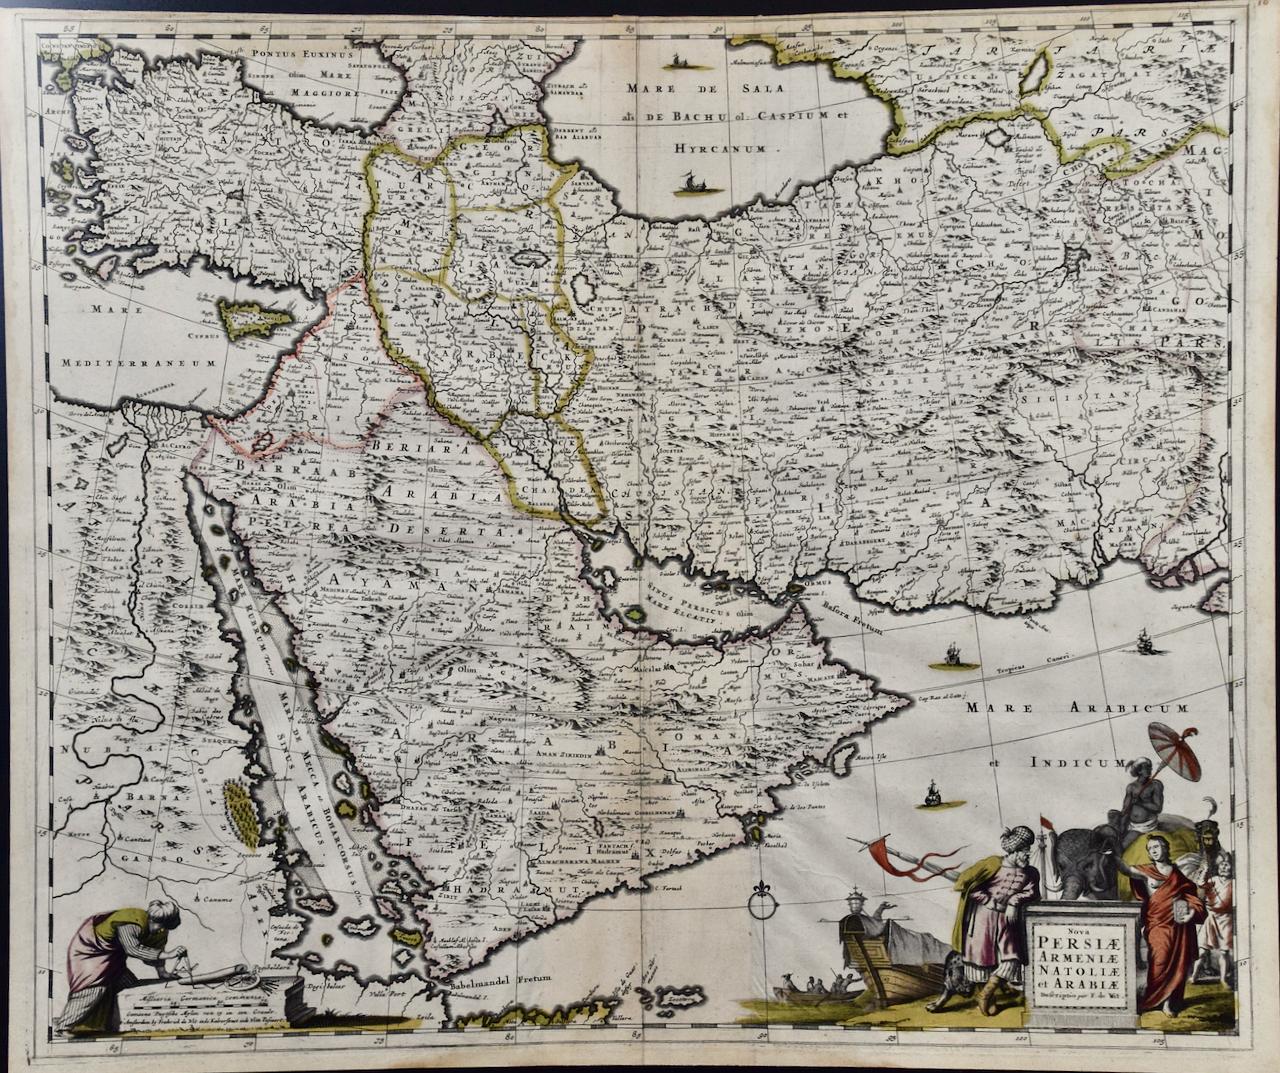 Persia, Armenia & Adjacent Regions: A Hand-colored 17th Century Map by De Wit  - Print by Frederick de Wit